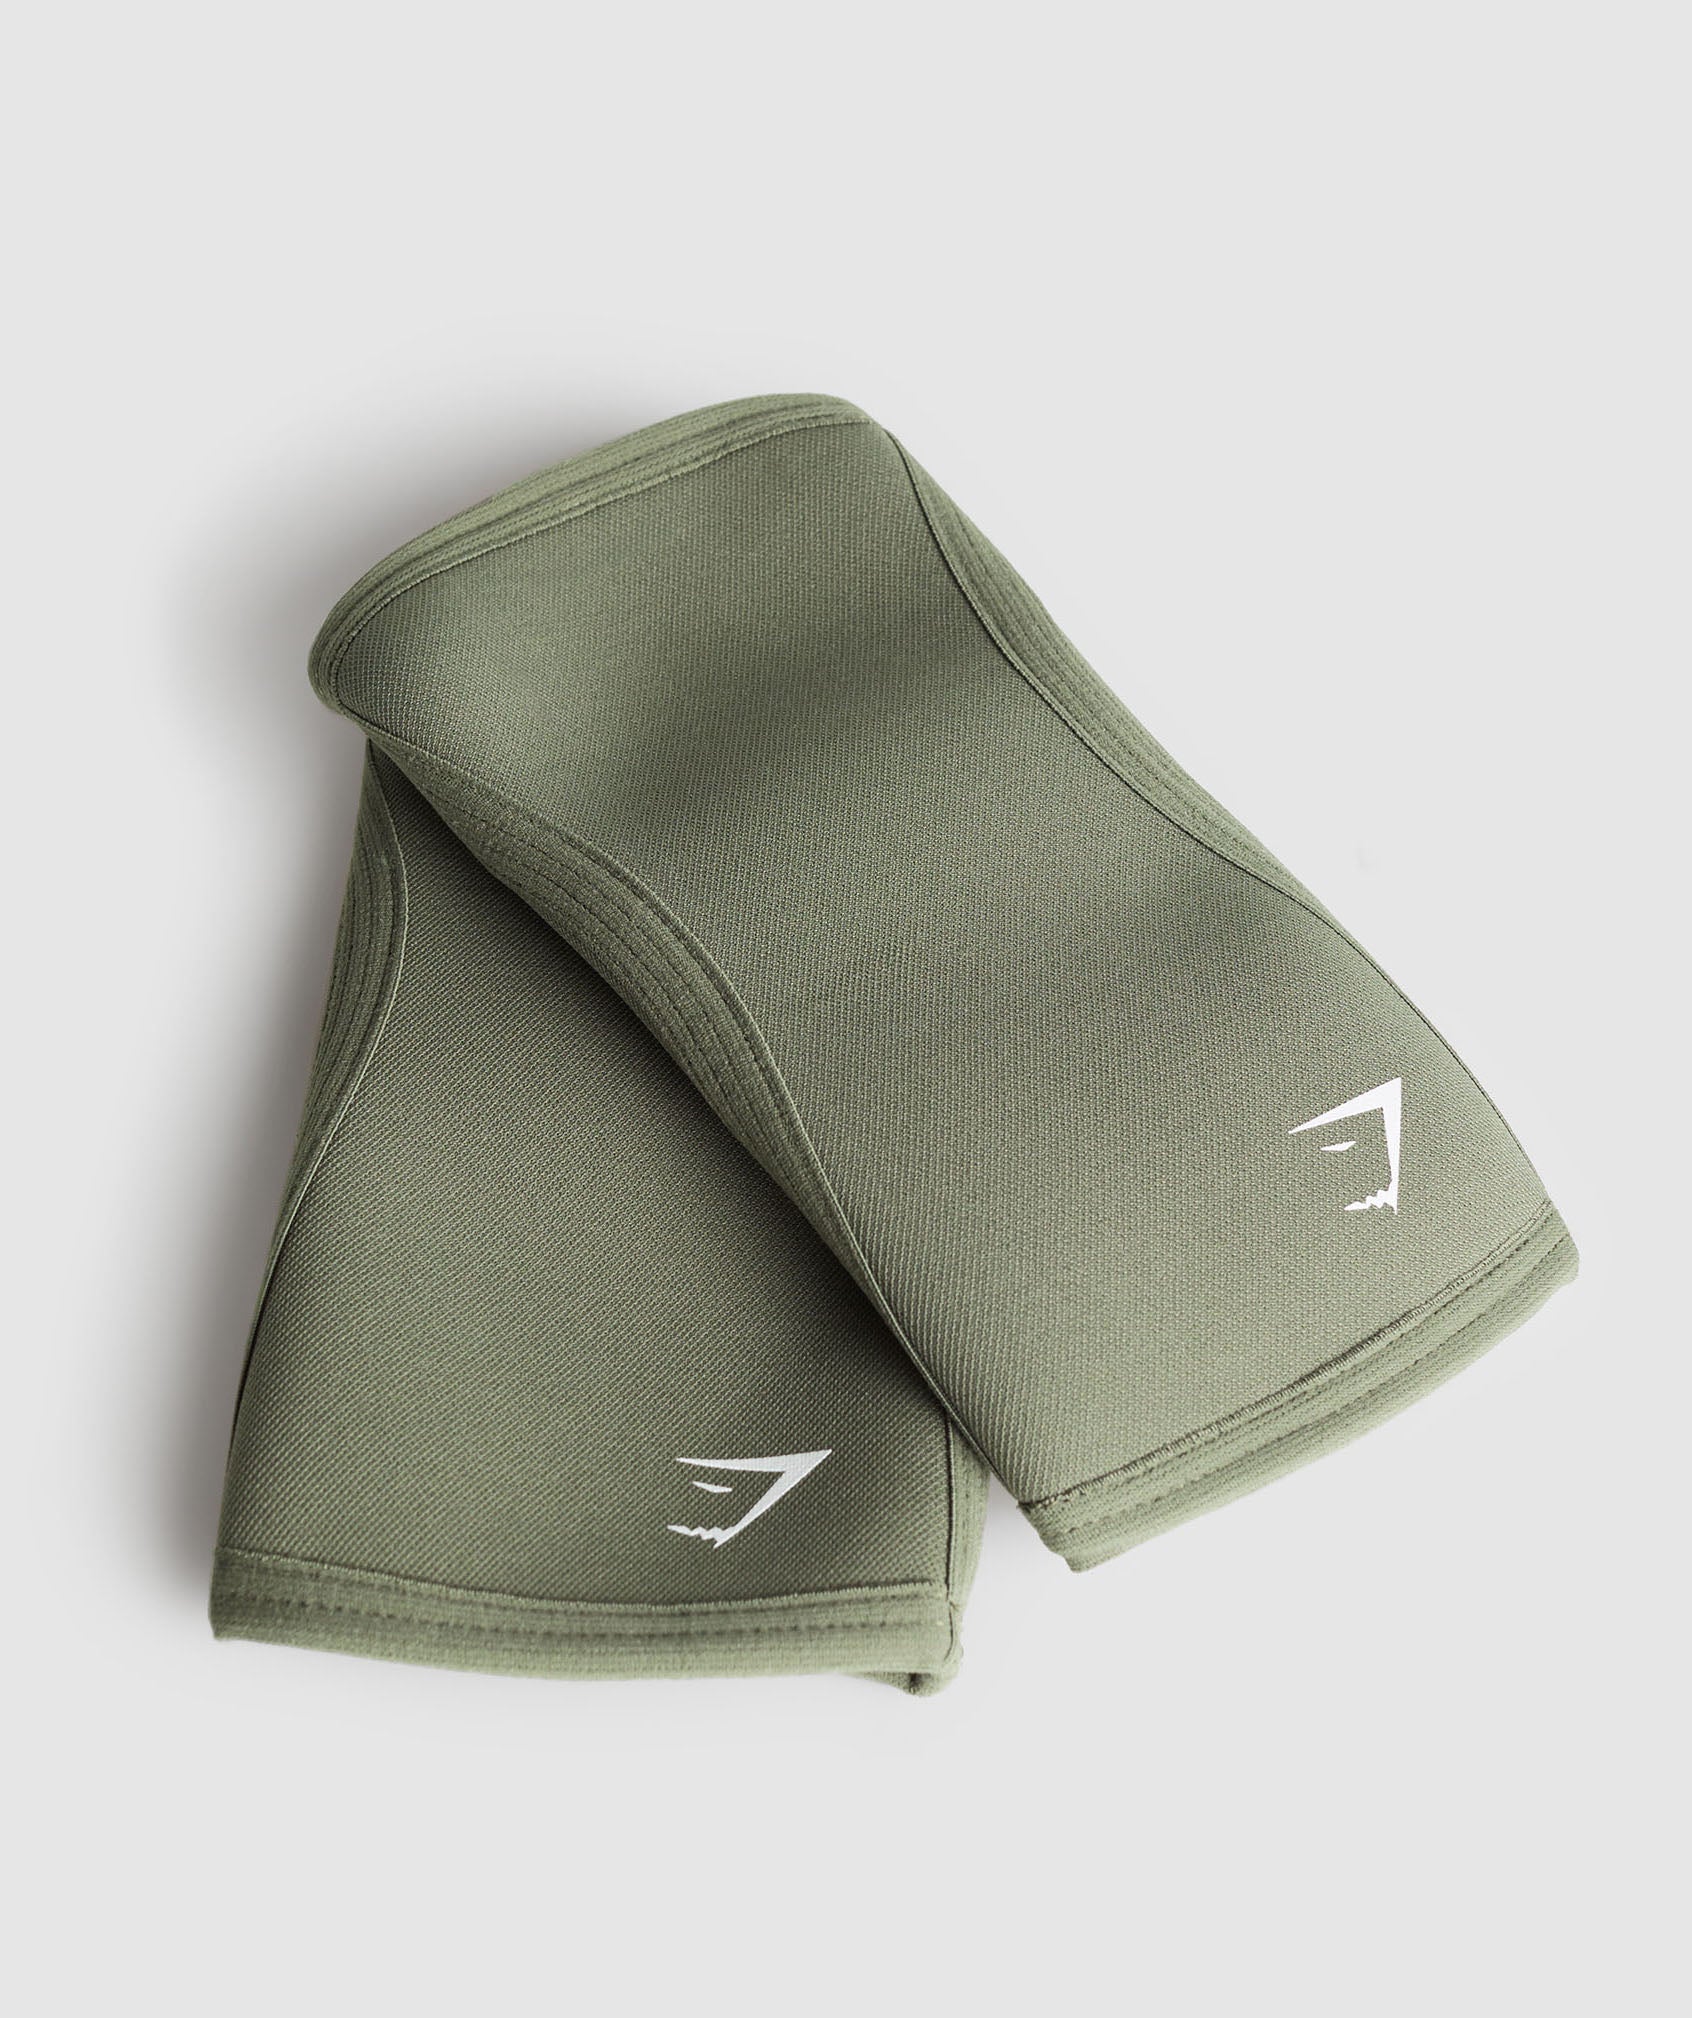 Knee Sleeves 5mm in {{variantColor} is out of stock